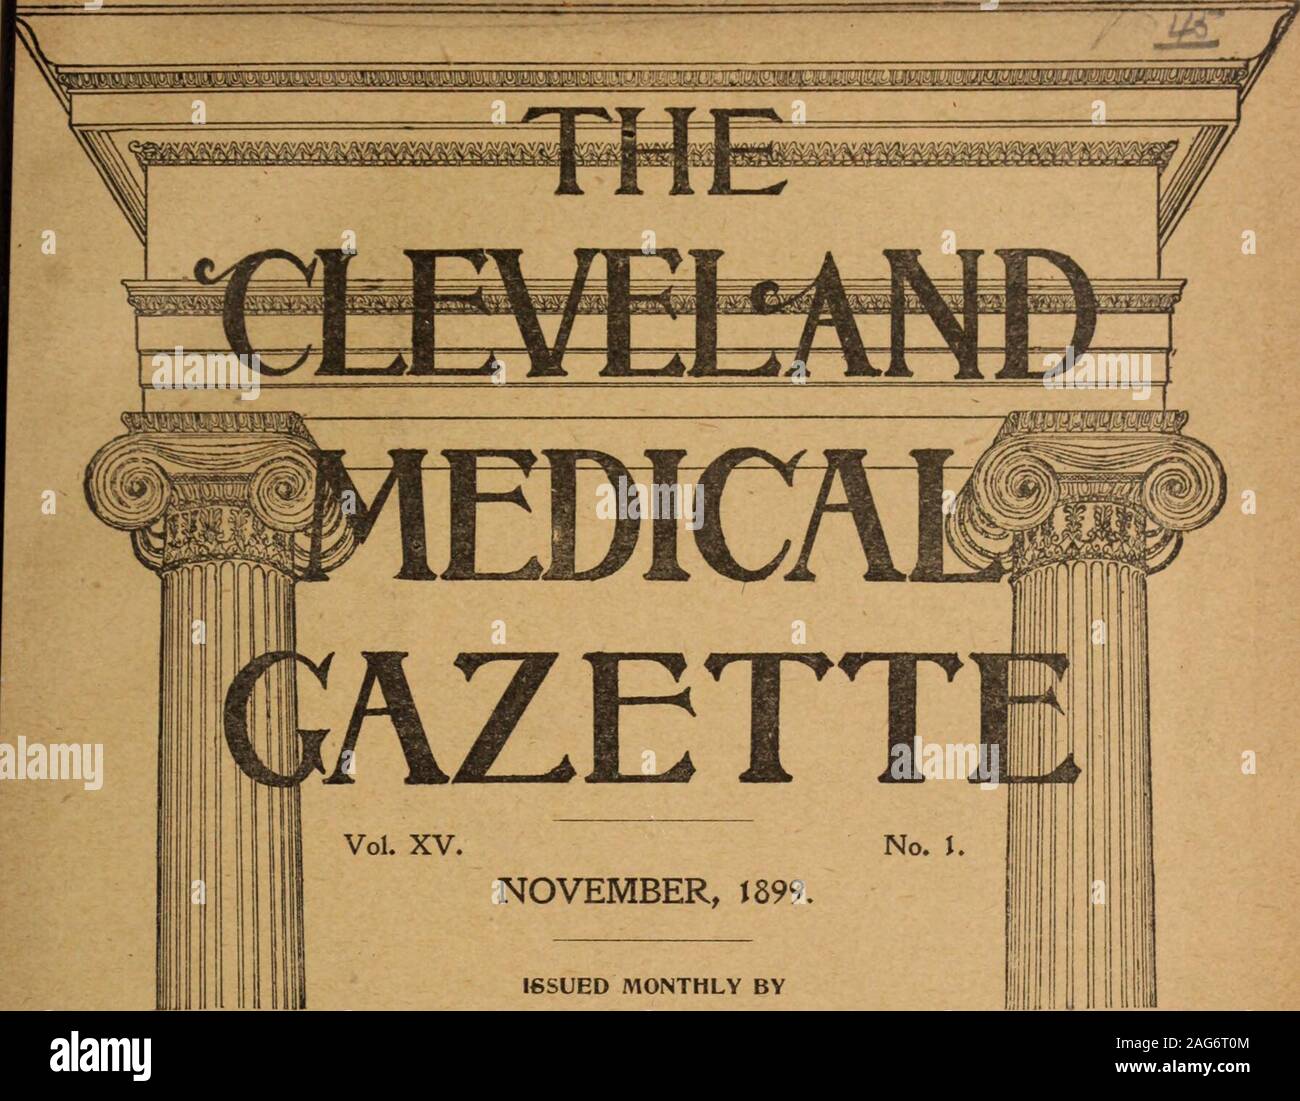 . Cleveland medical gazette. THE MEDllftI tt^im^TE PUBLISH CLEVELAND, OHIO. Contents* ORIGINAL ARTIC-tP.S: The Study of VinOeral Anatomy, byByron i^oB^NSON. B. S. M. D i Report and Discussiono d Cja^fji-y- Dr. Howards. Straight ii Tuberculosis of the Hip Joint, byH. A. Becker, M. D 17 A Simple Device for Rapid Hypoder- |moclysis in Combatting Shock, byEvan ONeiIvI. Kane, M. D 25 Speech of Gen. Leonard Wood 28 A Tapeworm Extracted Through theMouth, by Dr. E. W. Ludi^ow 30clevelandmedical1518unse Stock Photo